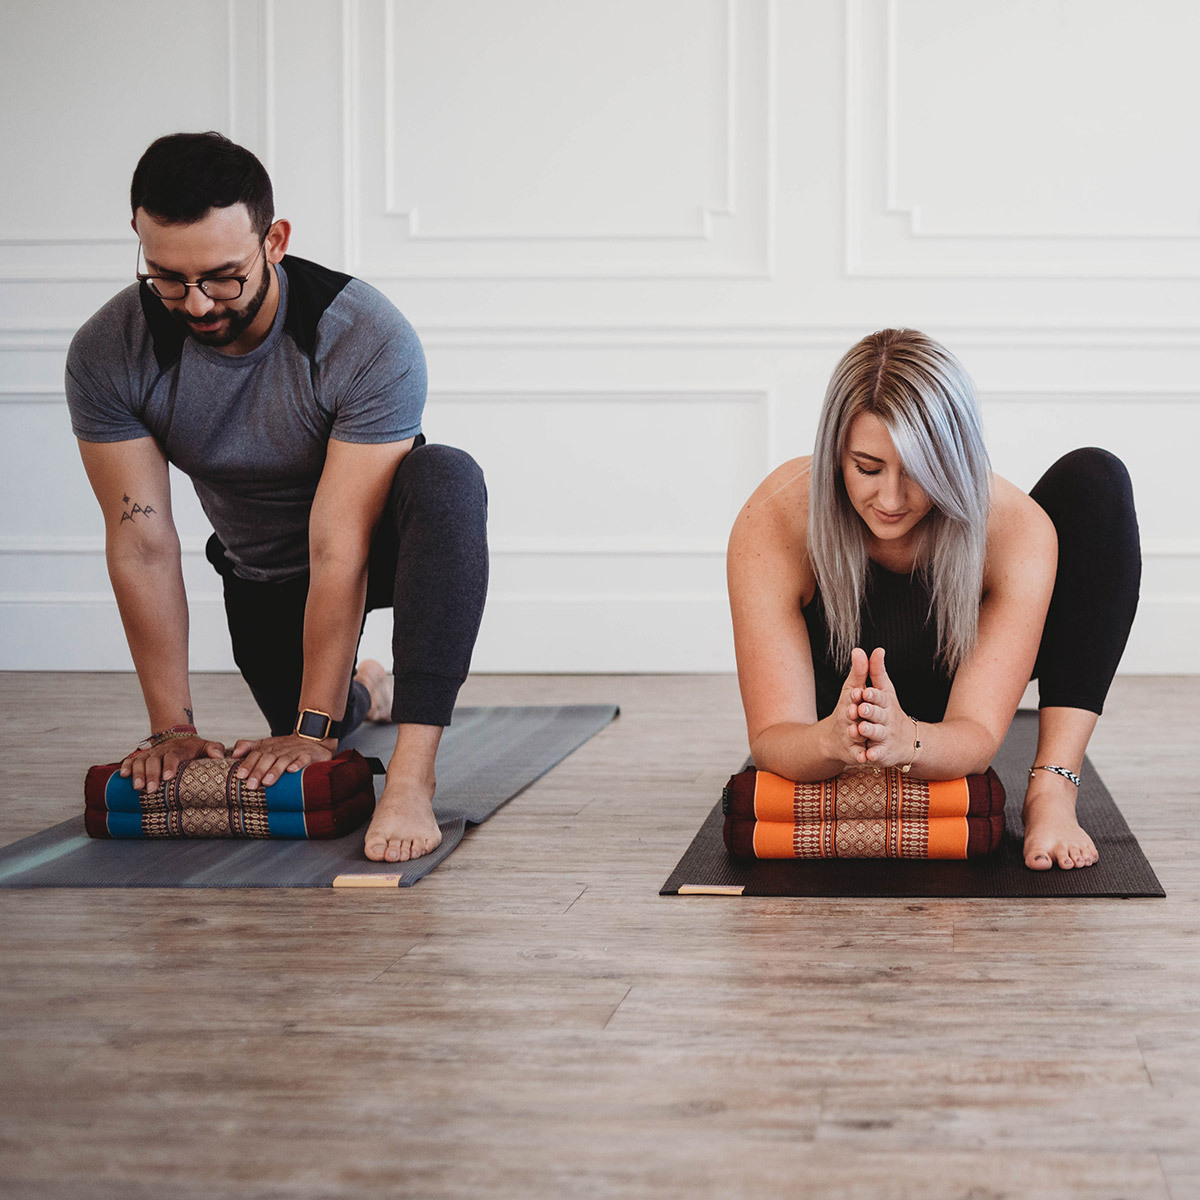 14 Sustainable Brands For Yoga Clothing, Mats & Meditation Gear